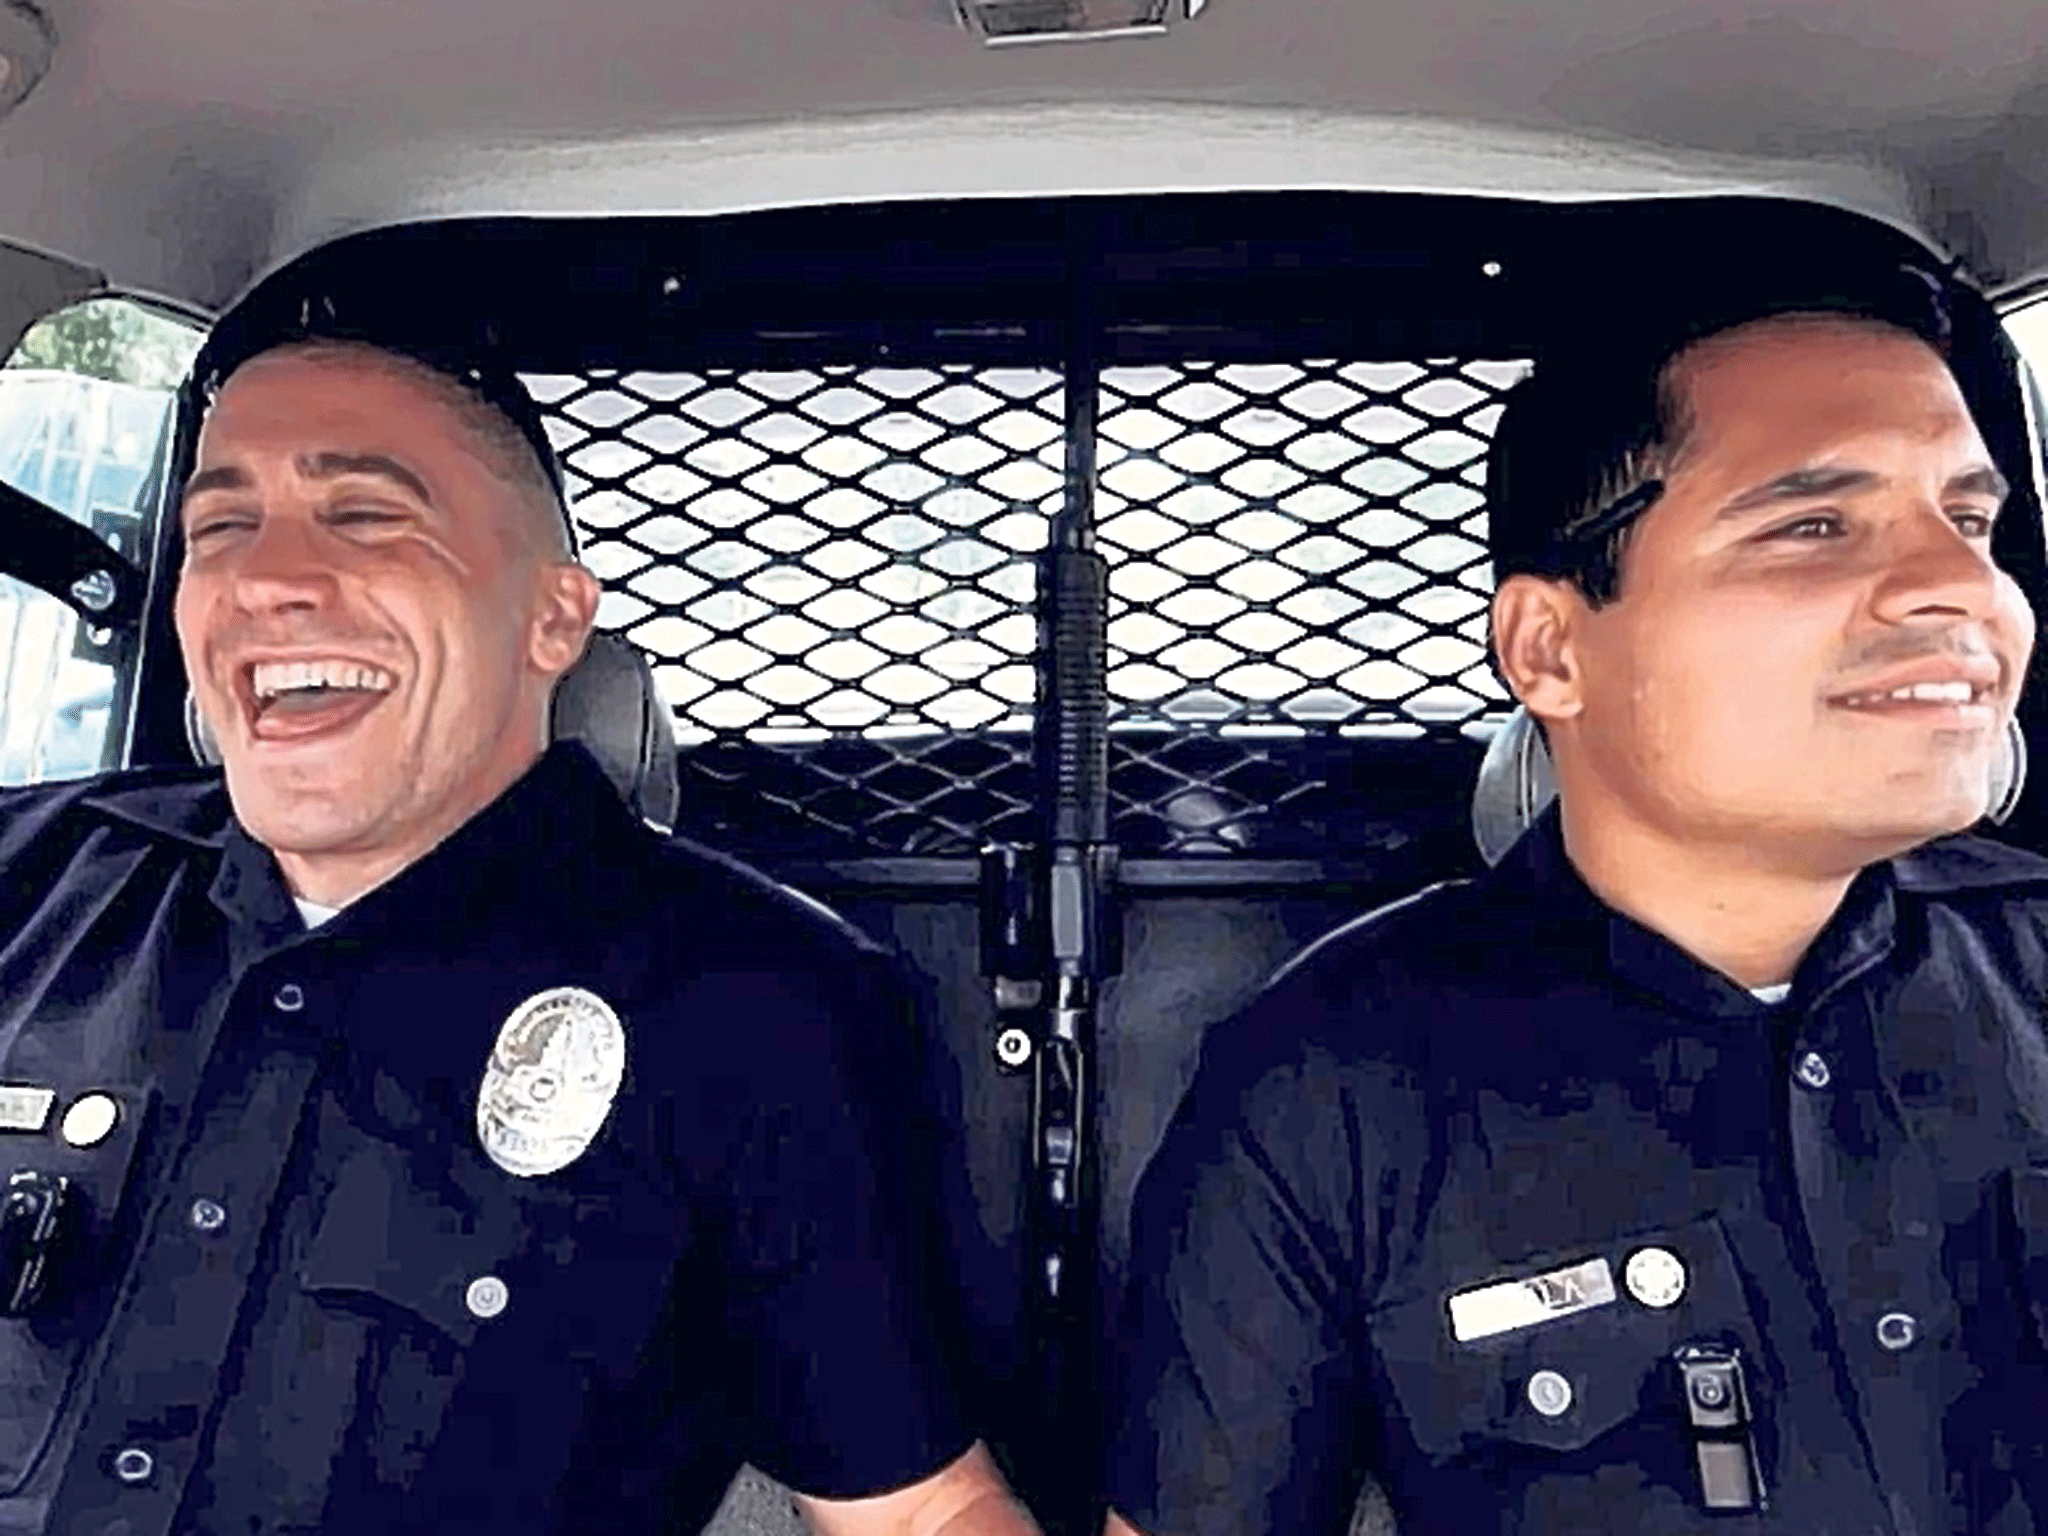 Good cop, good cop: Jake Gyllenhaal and Michael Pena play two LAPD officers, who try to do the best job they can under trying conditions